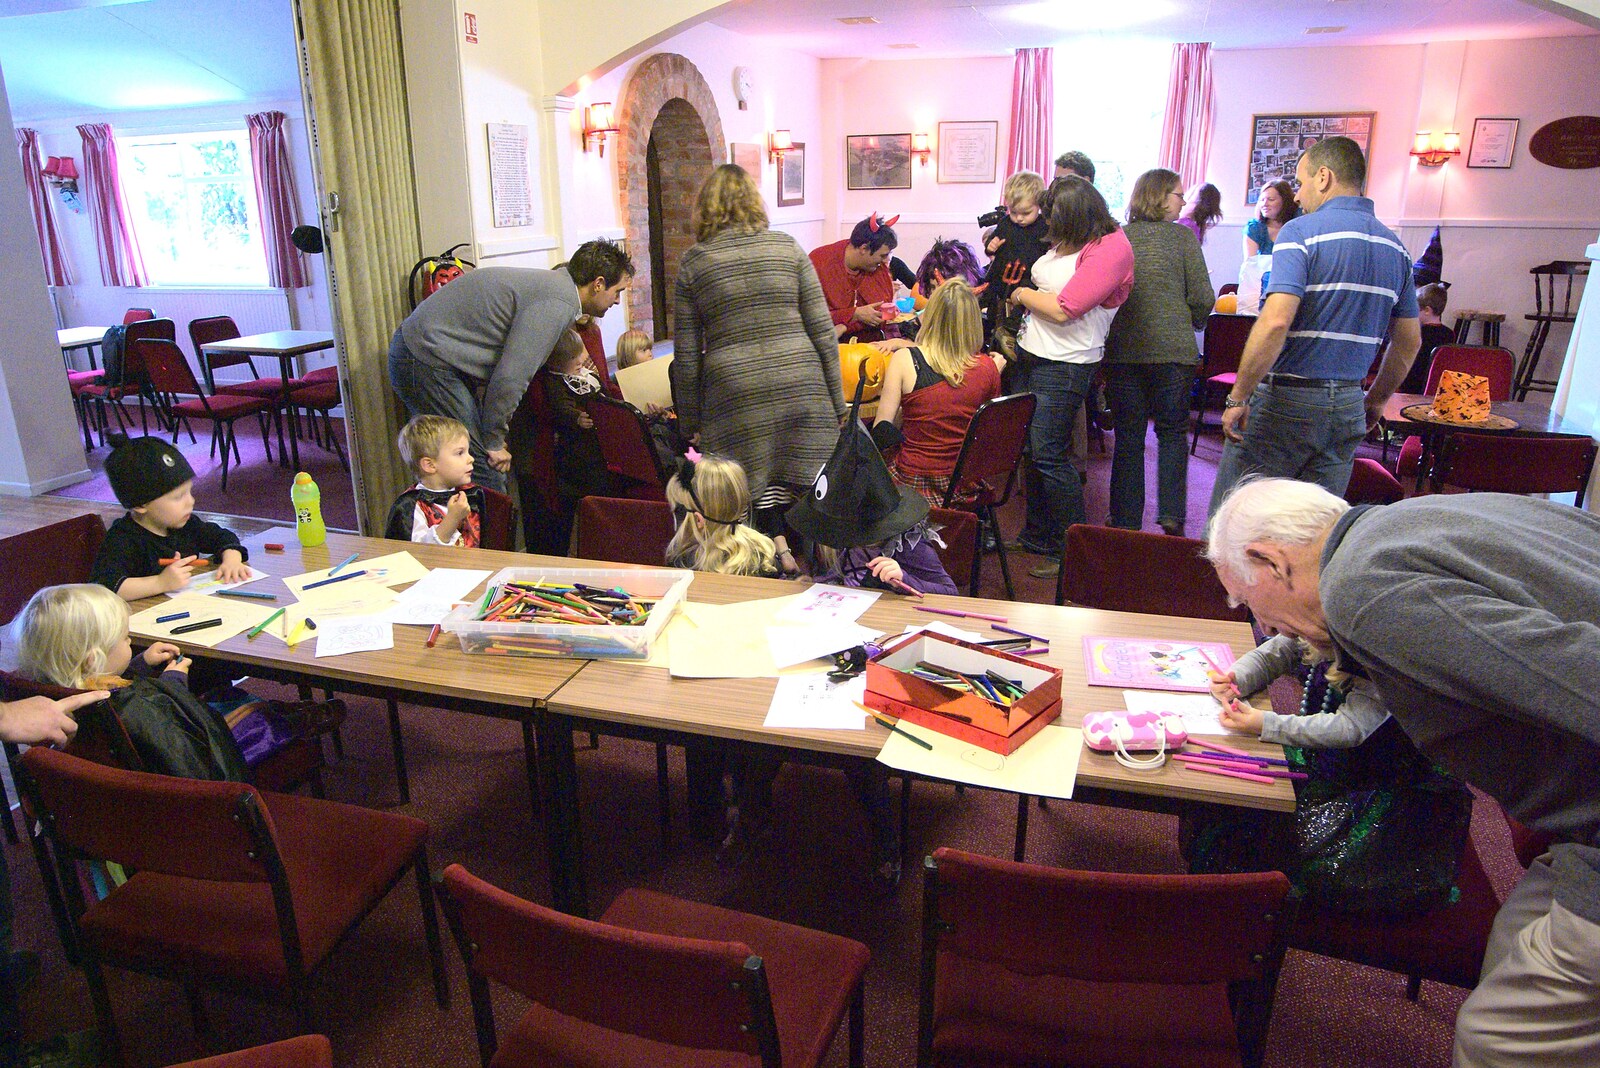 Some sort of crafting occurs from Amelia's Birthday, Brome Village Hall, Suffolk - 29th October 2011